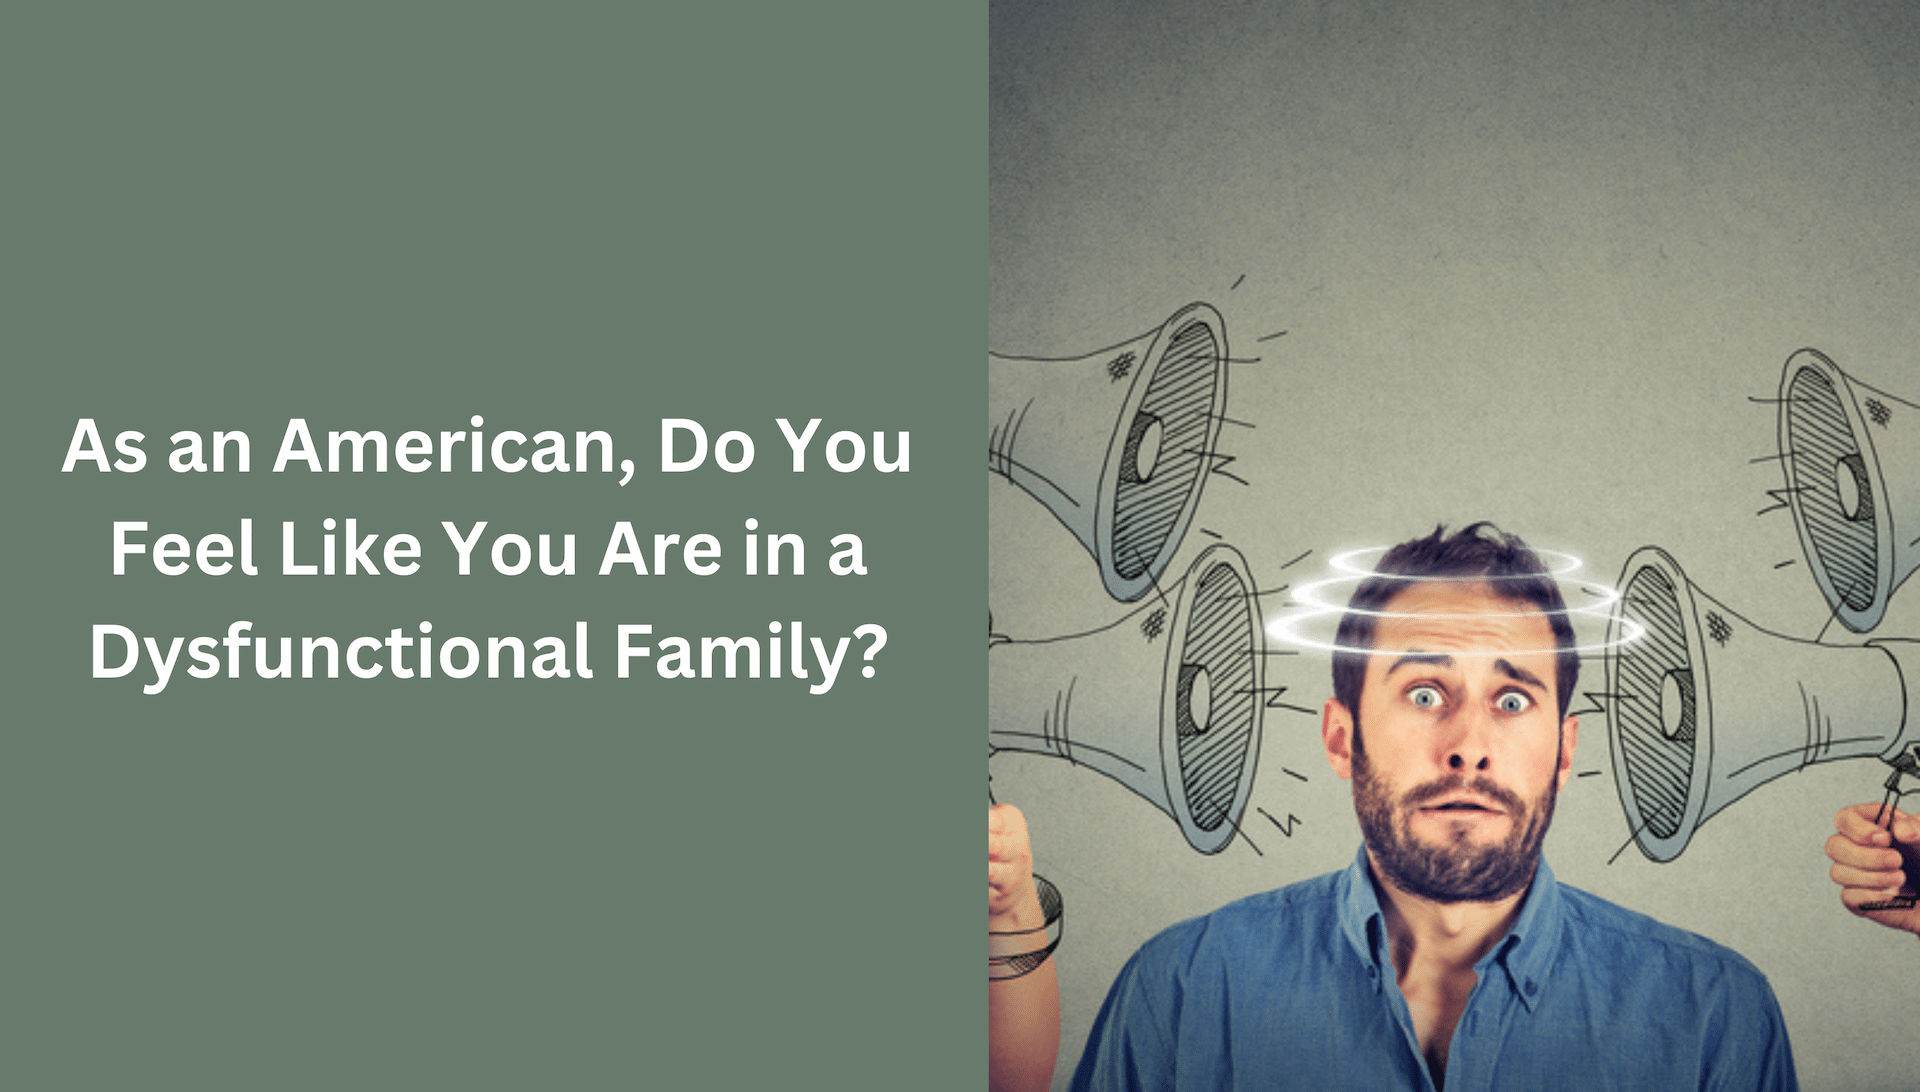 As an American, do you feel like you are in a dysfunctional family?